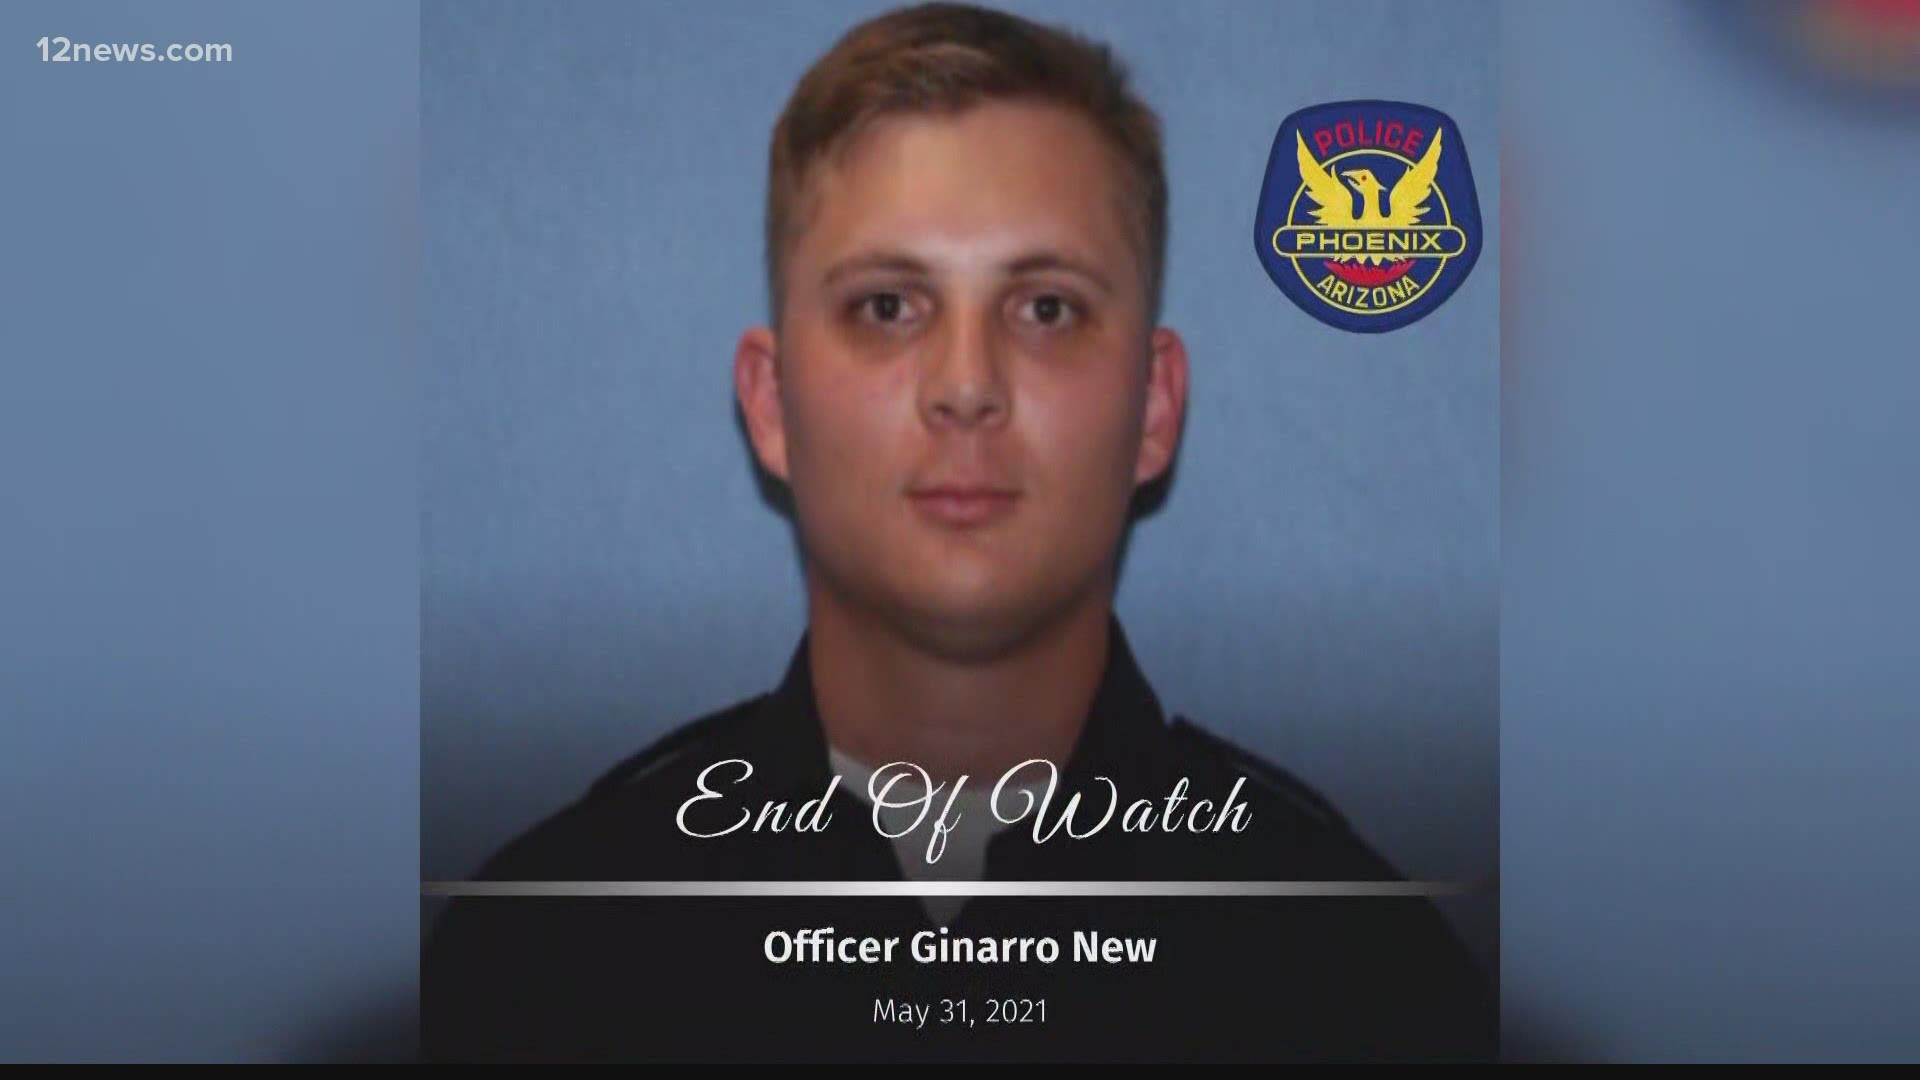 A Phoenix Police Department officer was killed in a vehicle collision overnight. The officer was identified as 27-year-old Ginarro New.